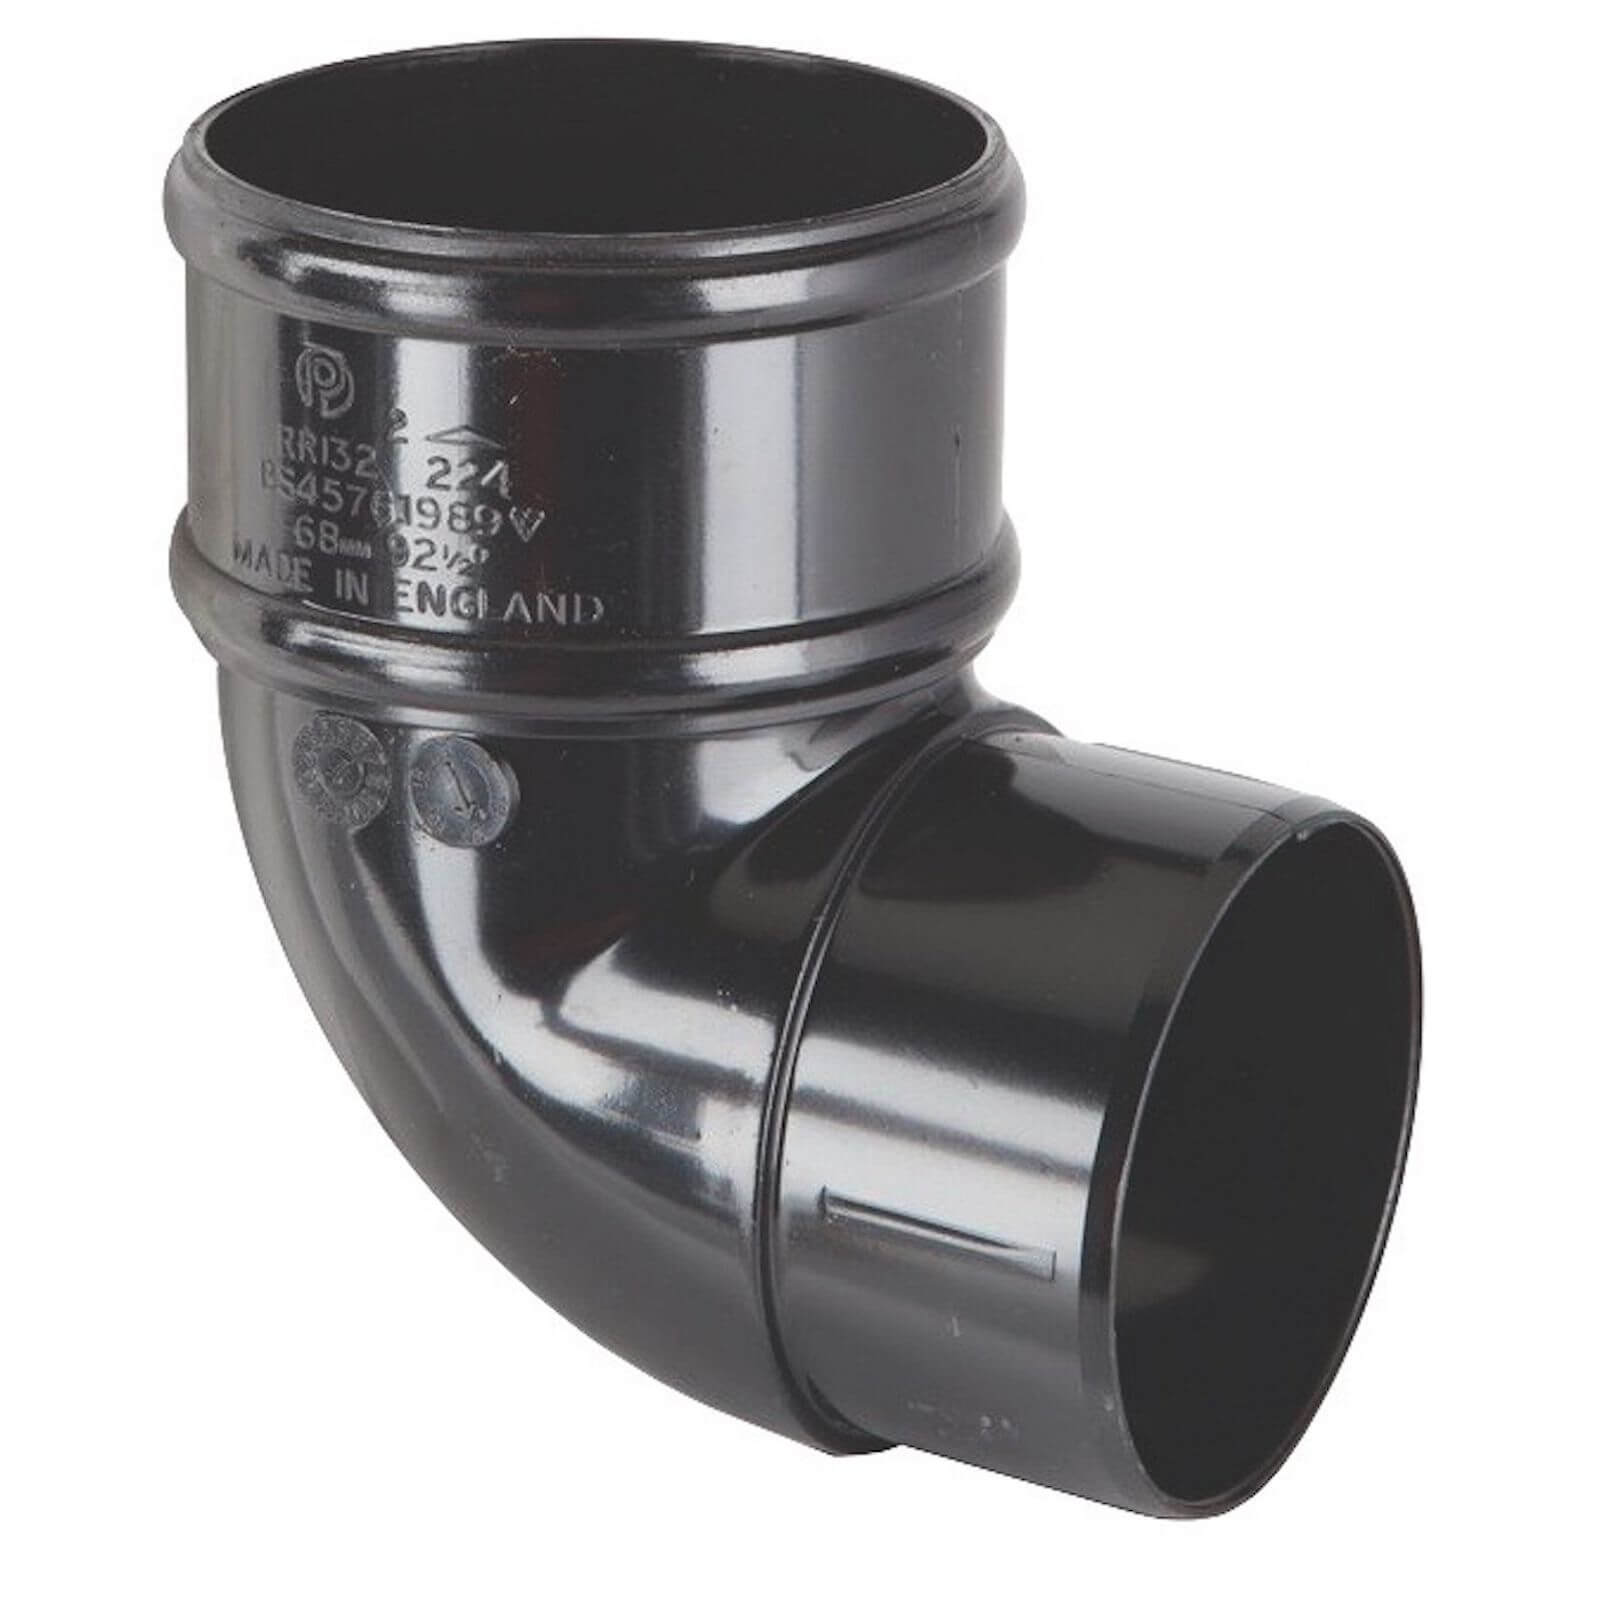 Polypipe Downpipe Offset Bend - 68mm x 92.5 Degree - Black